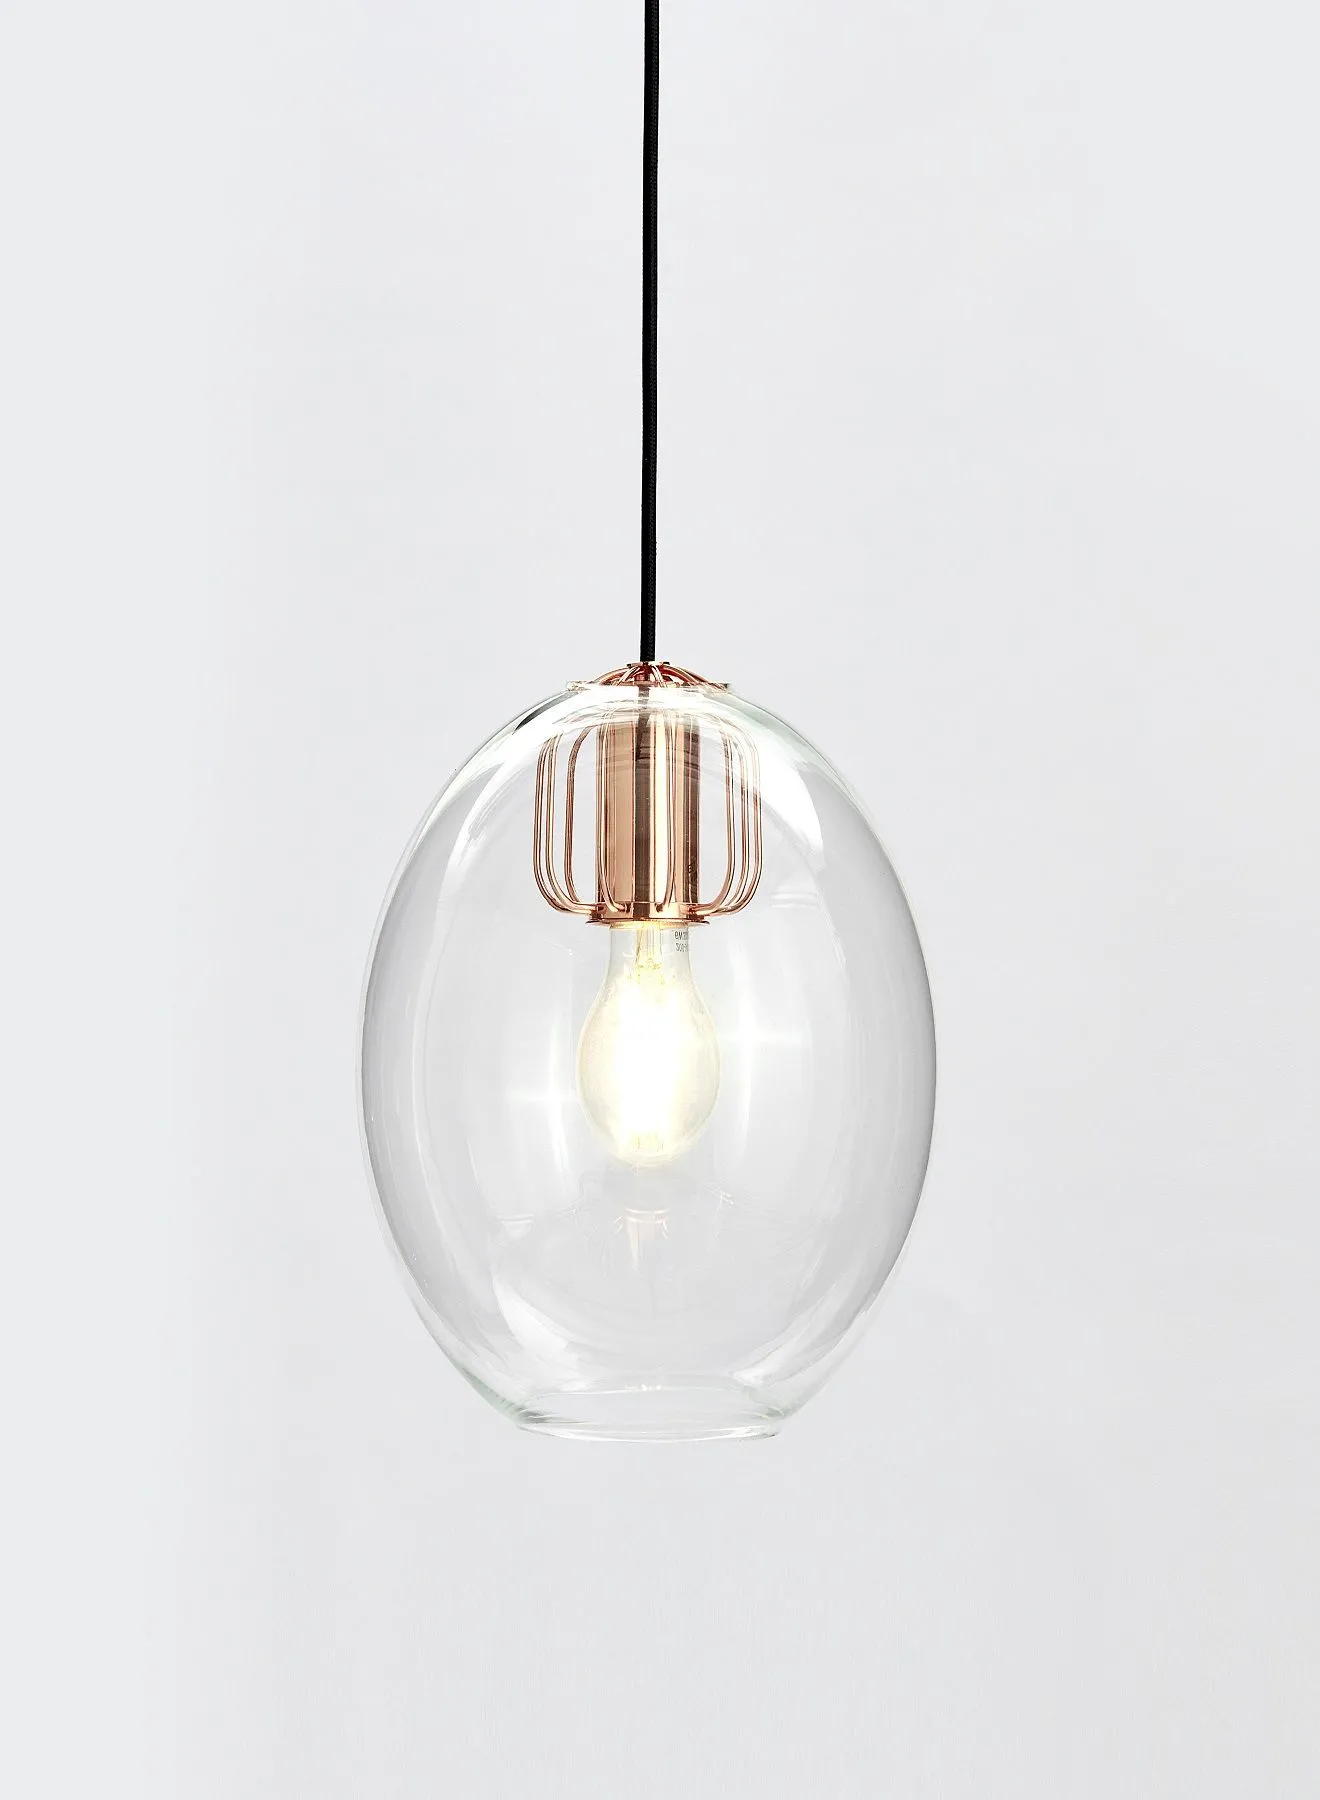 Switch Decorative Pendant Lamp Unique Luxury Quality Material for the Perfect Stylish Home PL020520 Clear/Brown 24cm